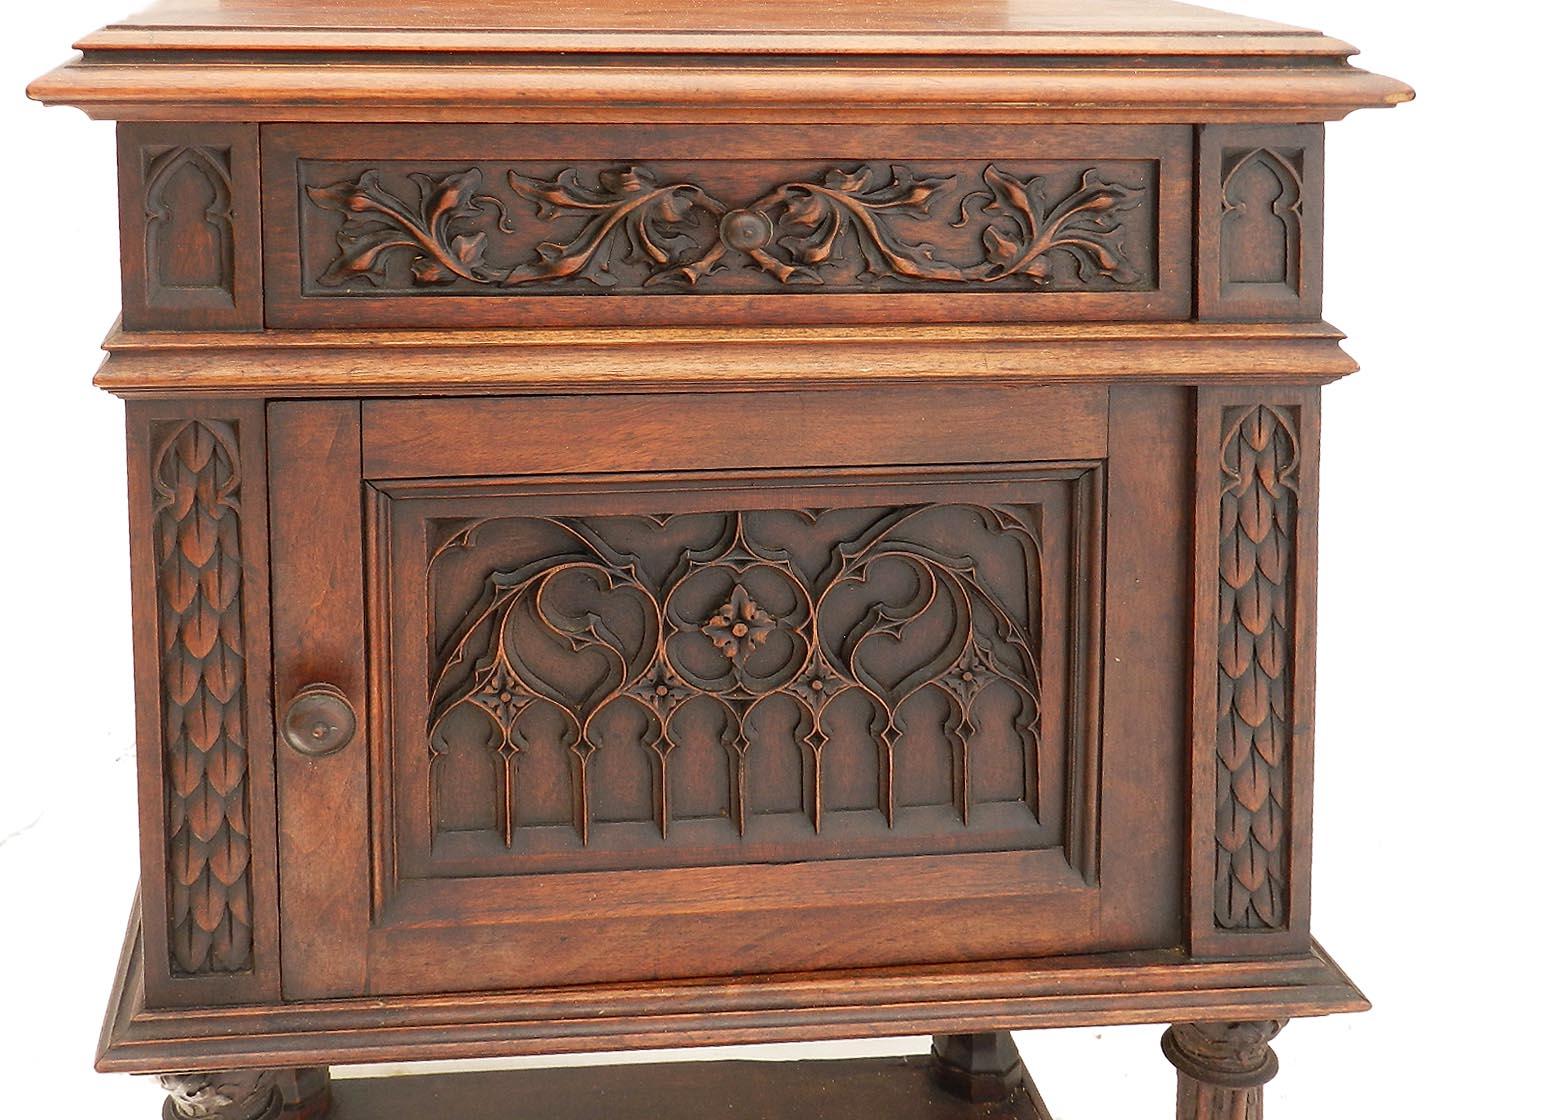 19th century Gothic Revival side cabinet French nightstand, circa 1860
Solid hand carved walnut
Single drawer
Cupboard door opens to variegated marble lined interior
Good antique condition with only minor signs of use for its age
Worthy of Harry